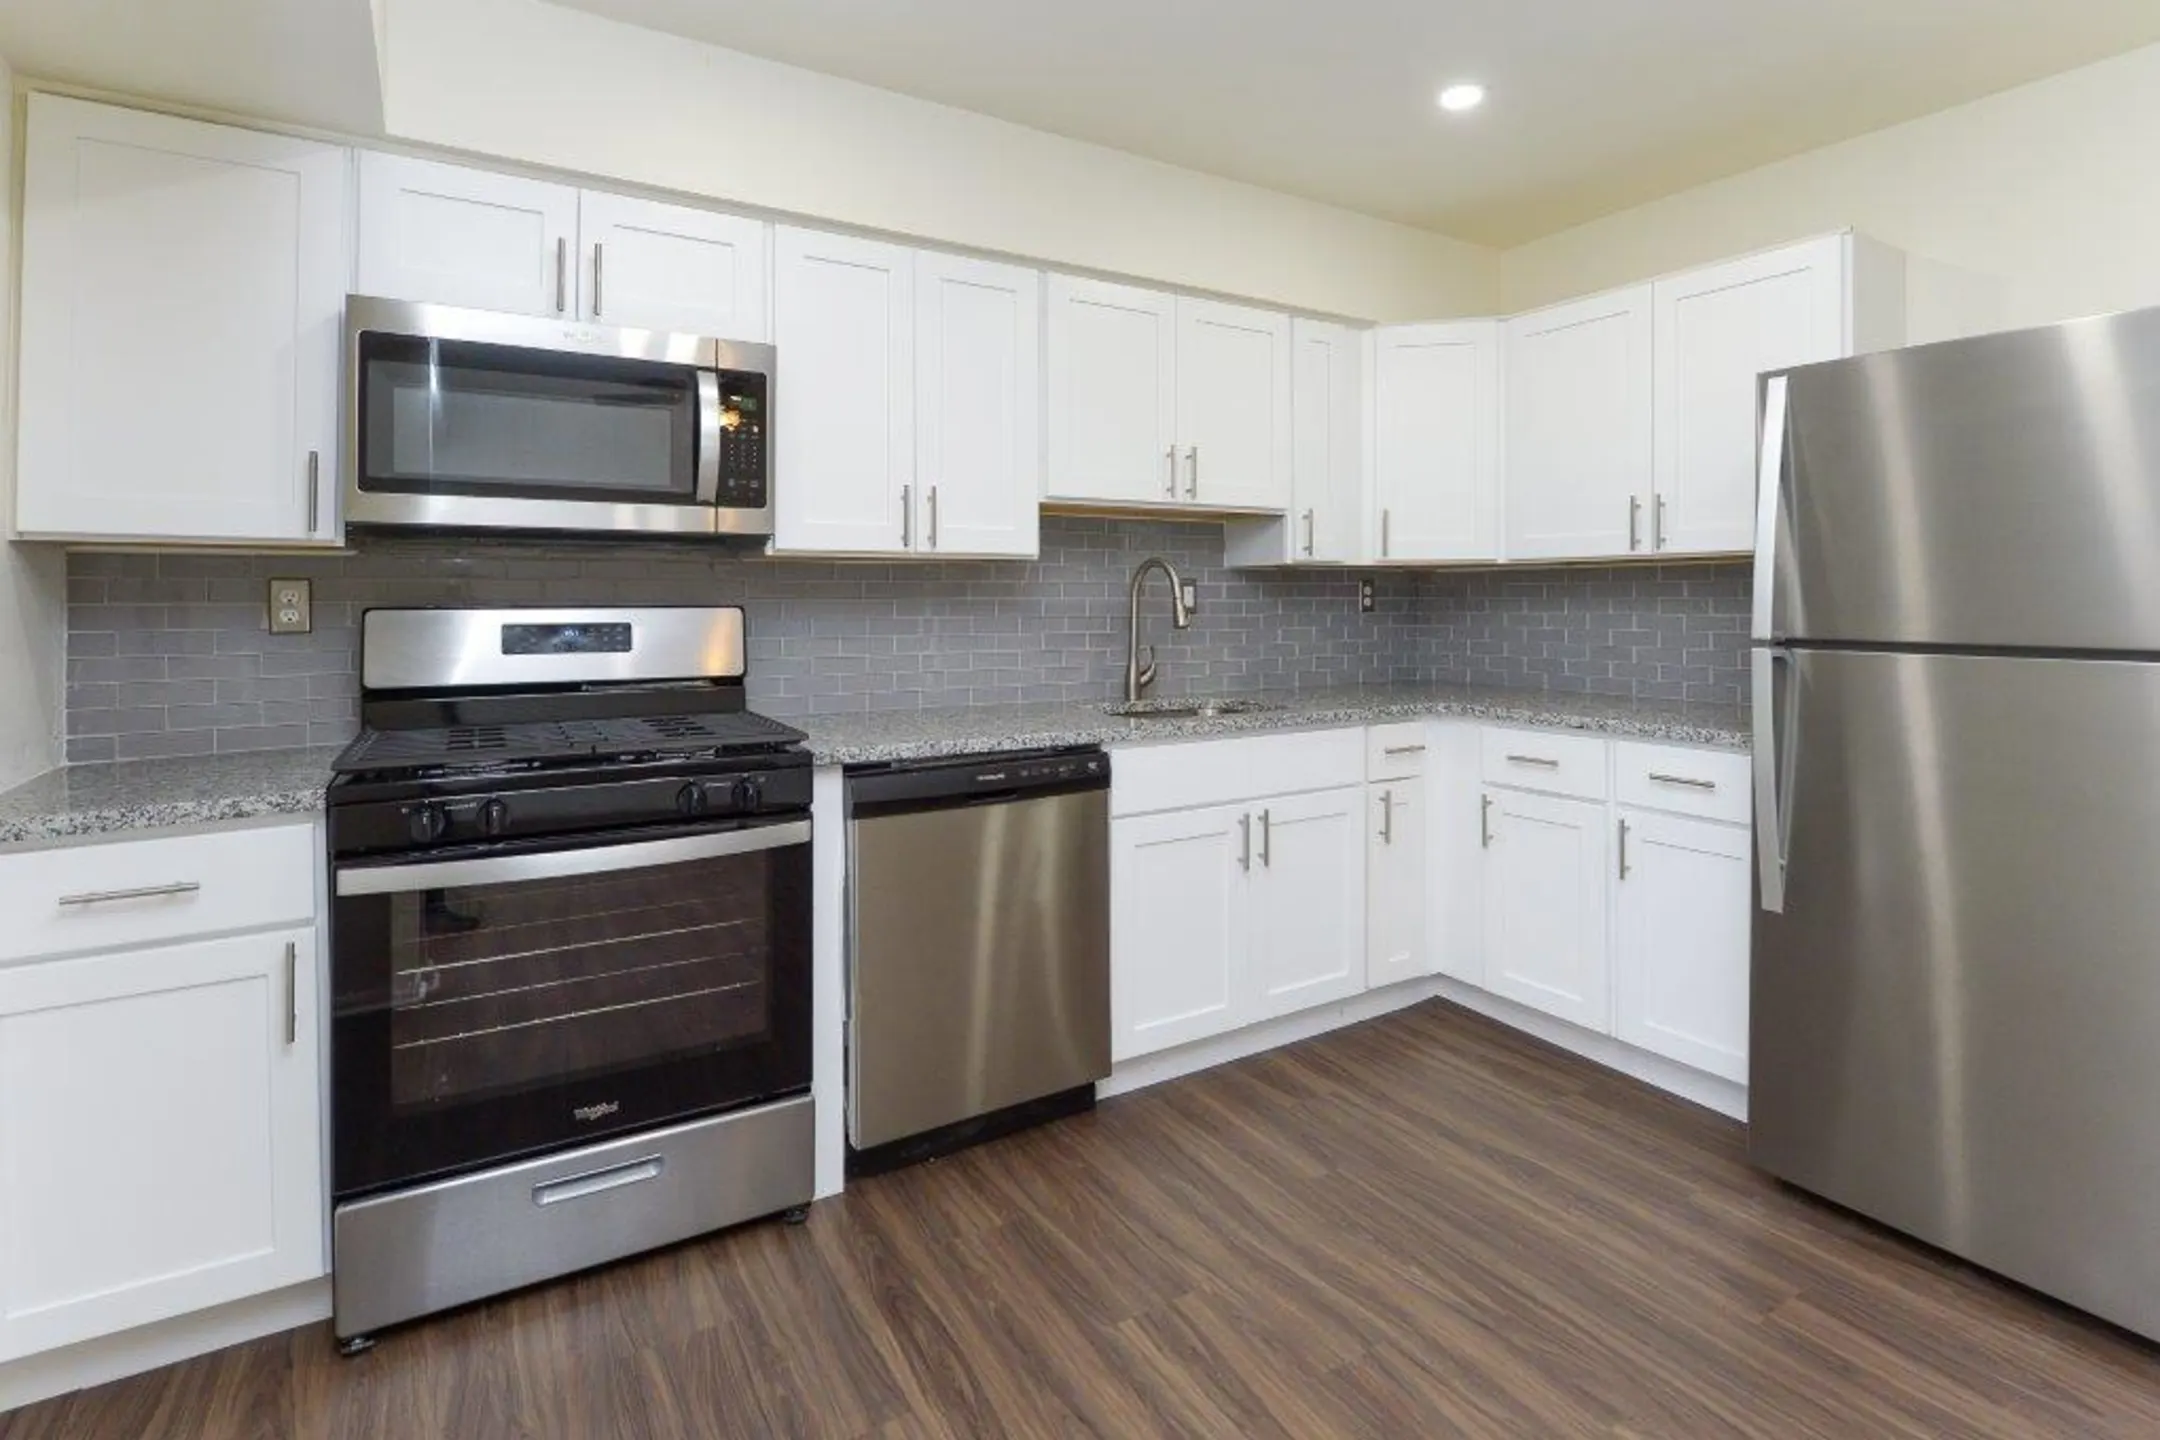 Kitchen - Brookside Manor Apartments & Townhomes - Lansdale, PA